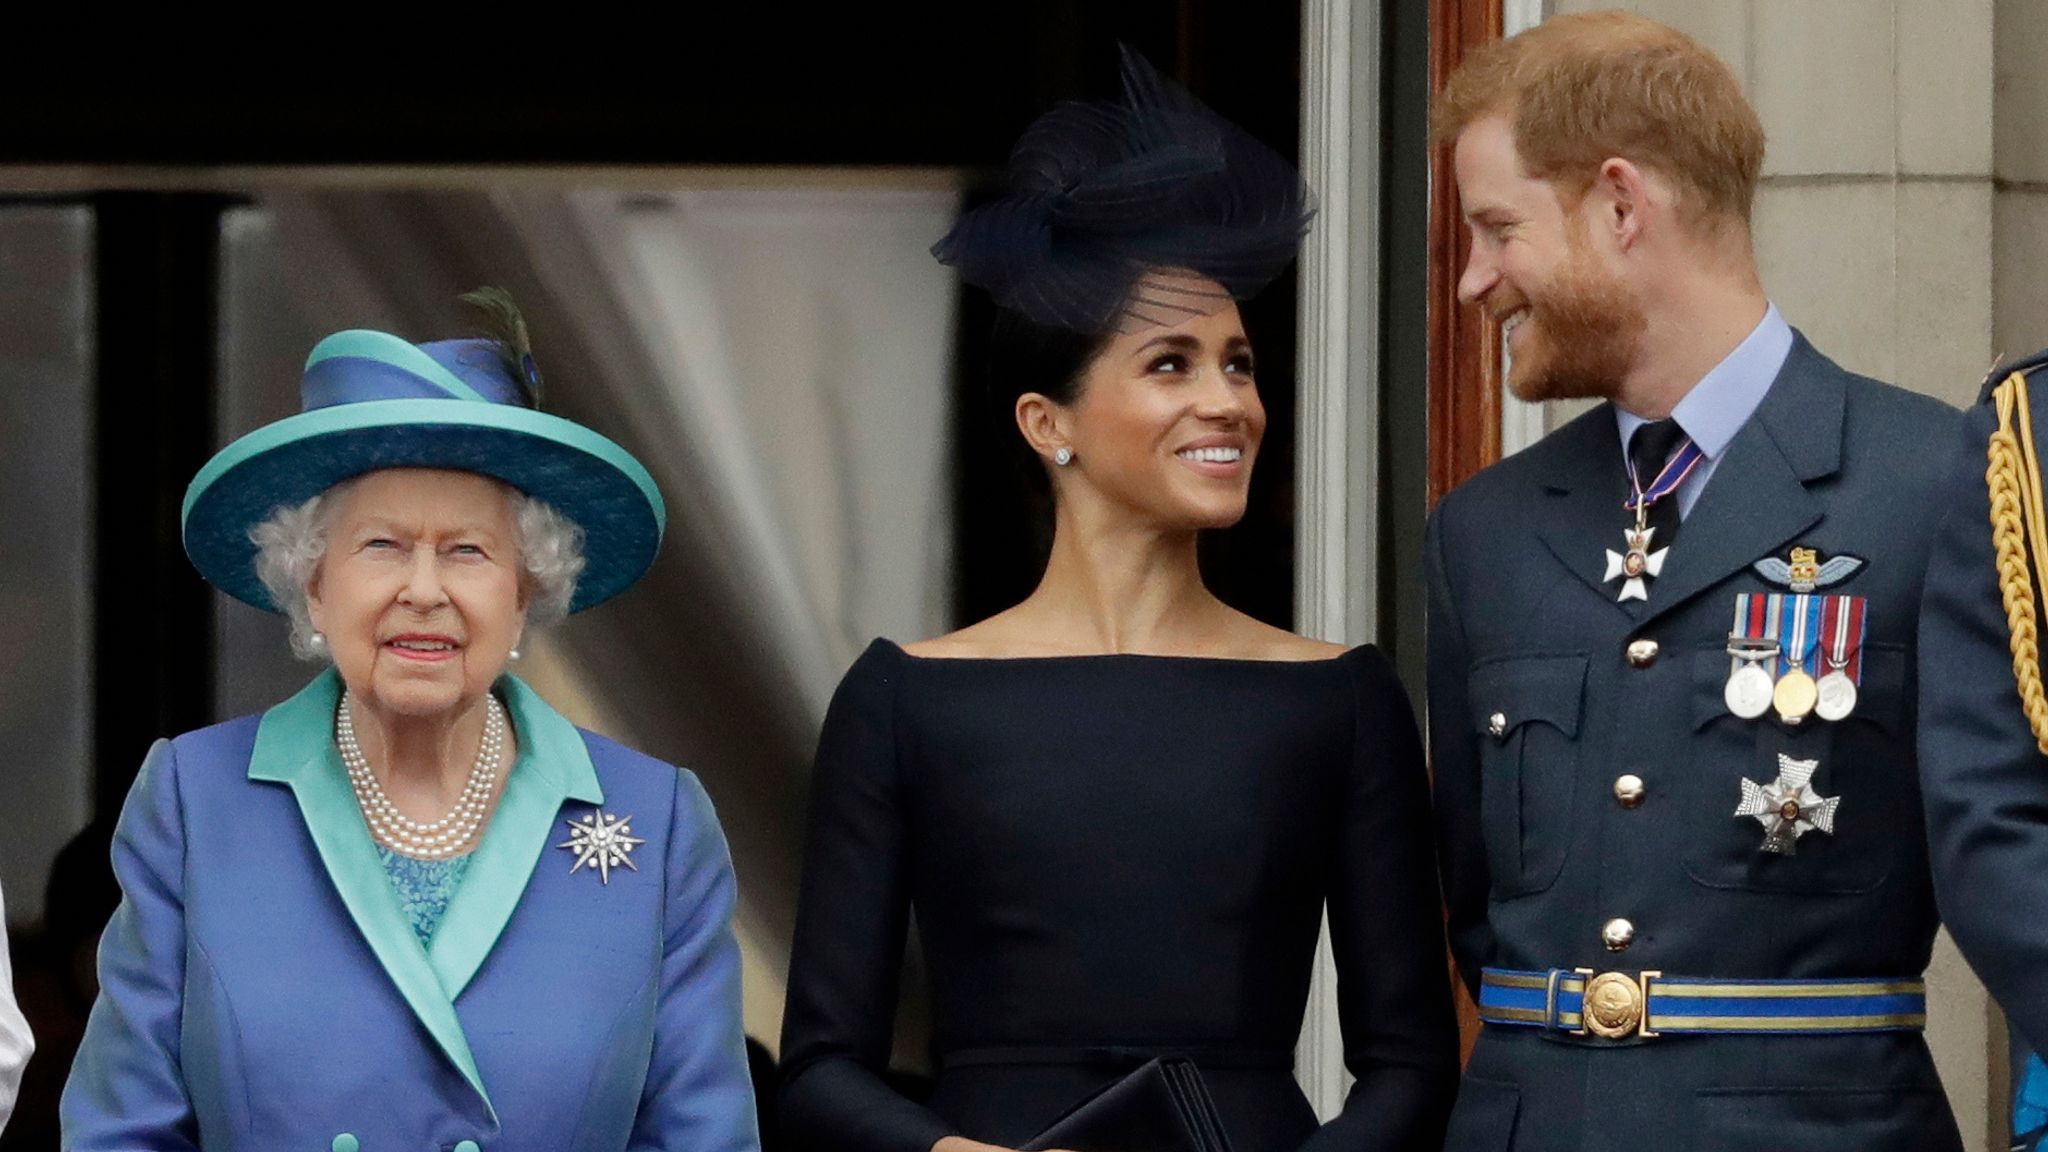 FILE - In this Tuesday, July 10, 2018 file photo Britain&#39;s Queen Elizabeth II, and Meghan the Duchess of Sussex and Prince Harry watch a flypast of Royal Air Force aircraft pass over Buckingham Palace in London. Prince Harry and Meghan Markle are to no longer use their HRH titles and will repay ..2.4 million of taxpayer&#39;s money spent on renovating their Berkshire home, Buckingham Palace announced Saturday, Jan. 18. 2020. (AP Photo/Matt Dunham, File) 